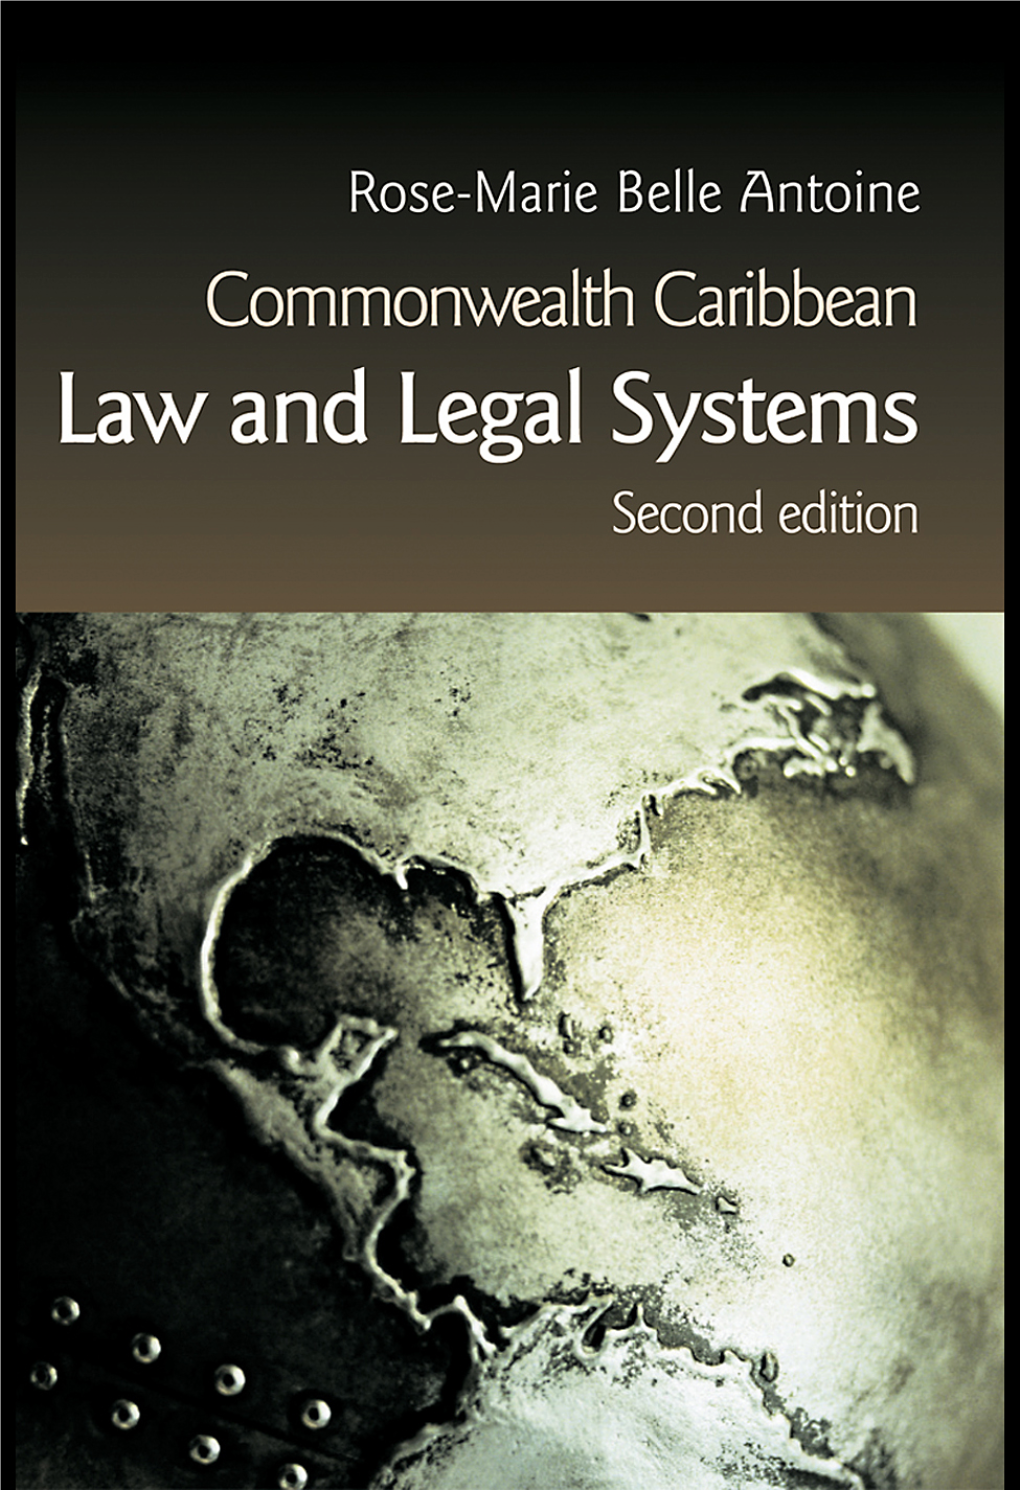 Commonwealth Caribbean Law and Legal Systems, Second Edition